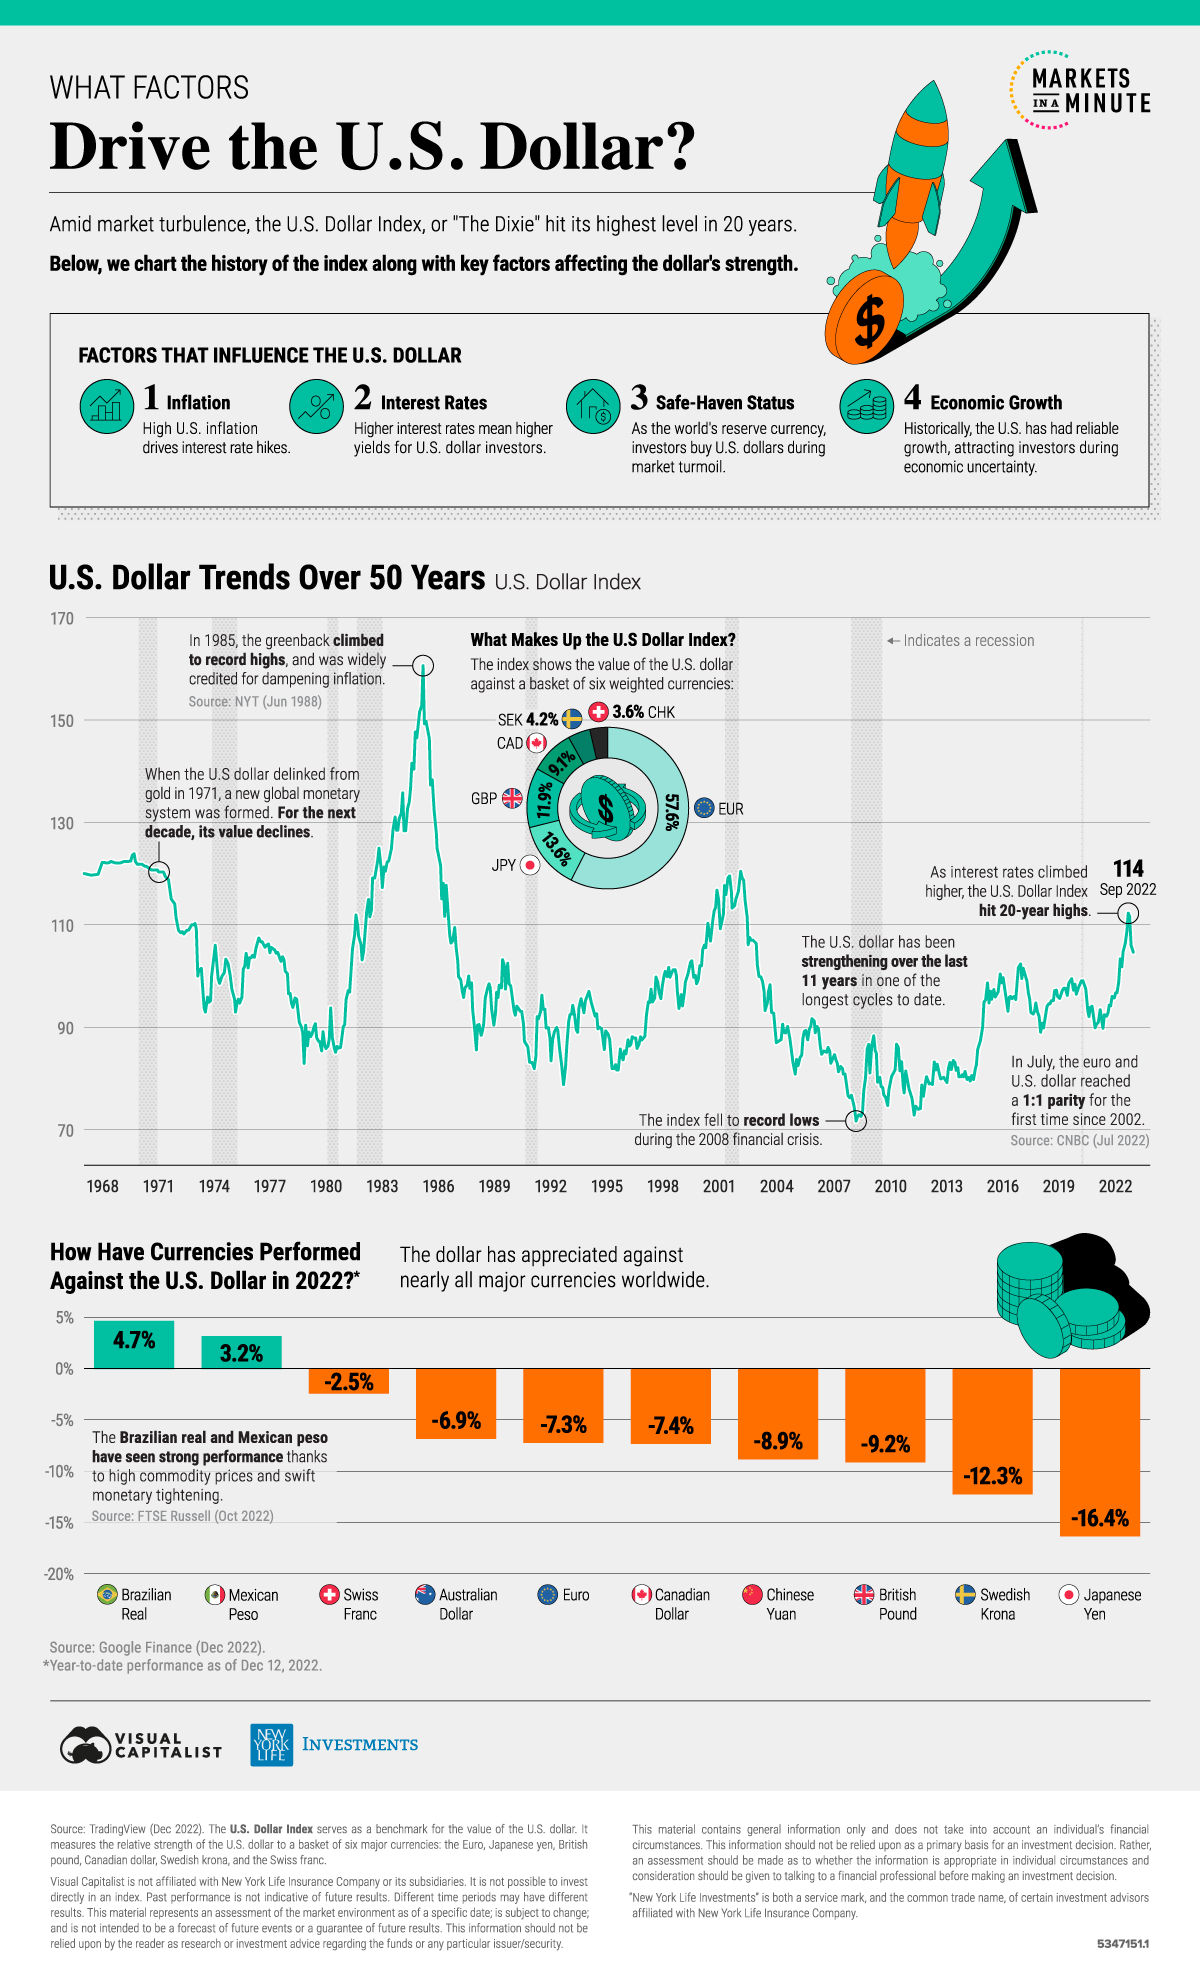 Visualized: What Factors Drive the U.S. Dollar?